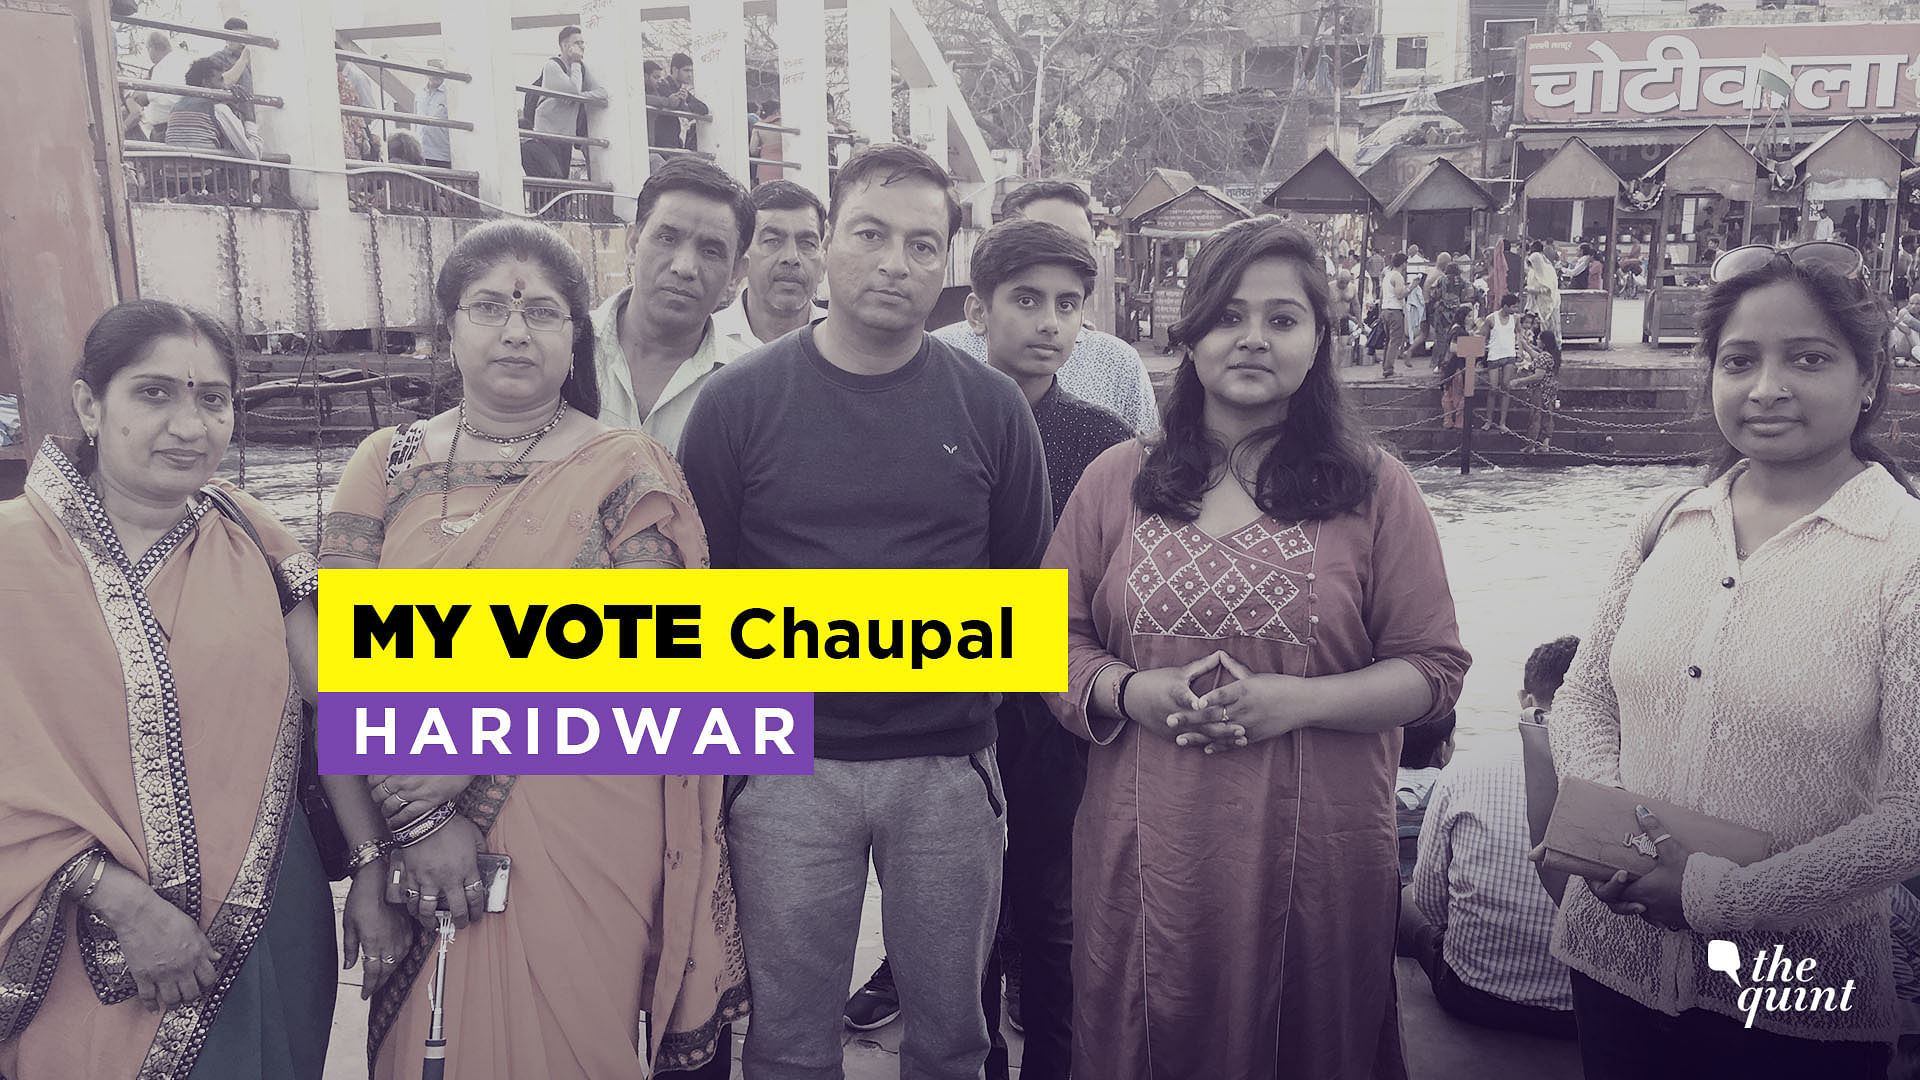 We reached Haridwar to find out if religious sentiments will have an impact on the votes in the upcoming Lok Sabha elections.